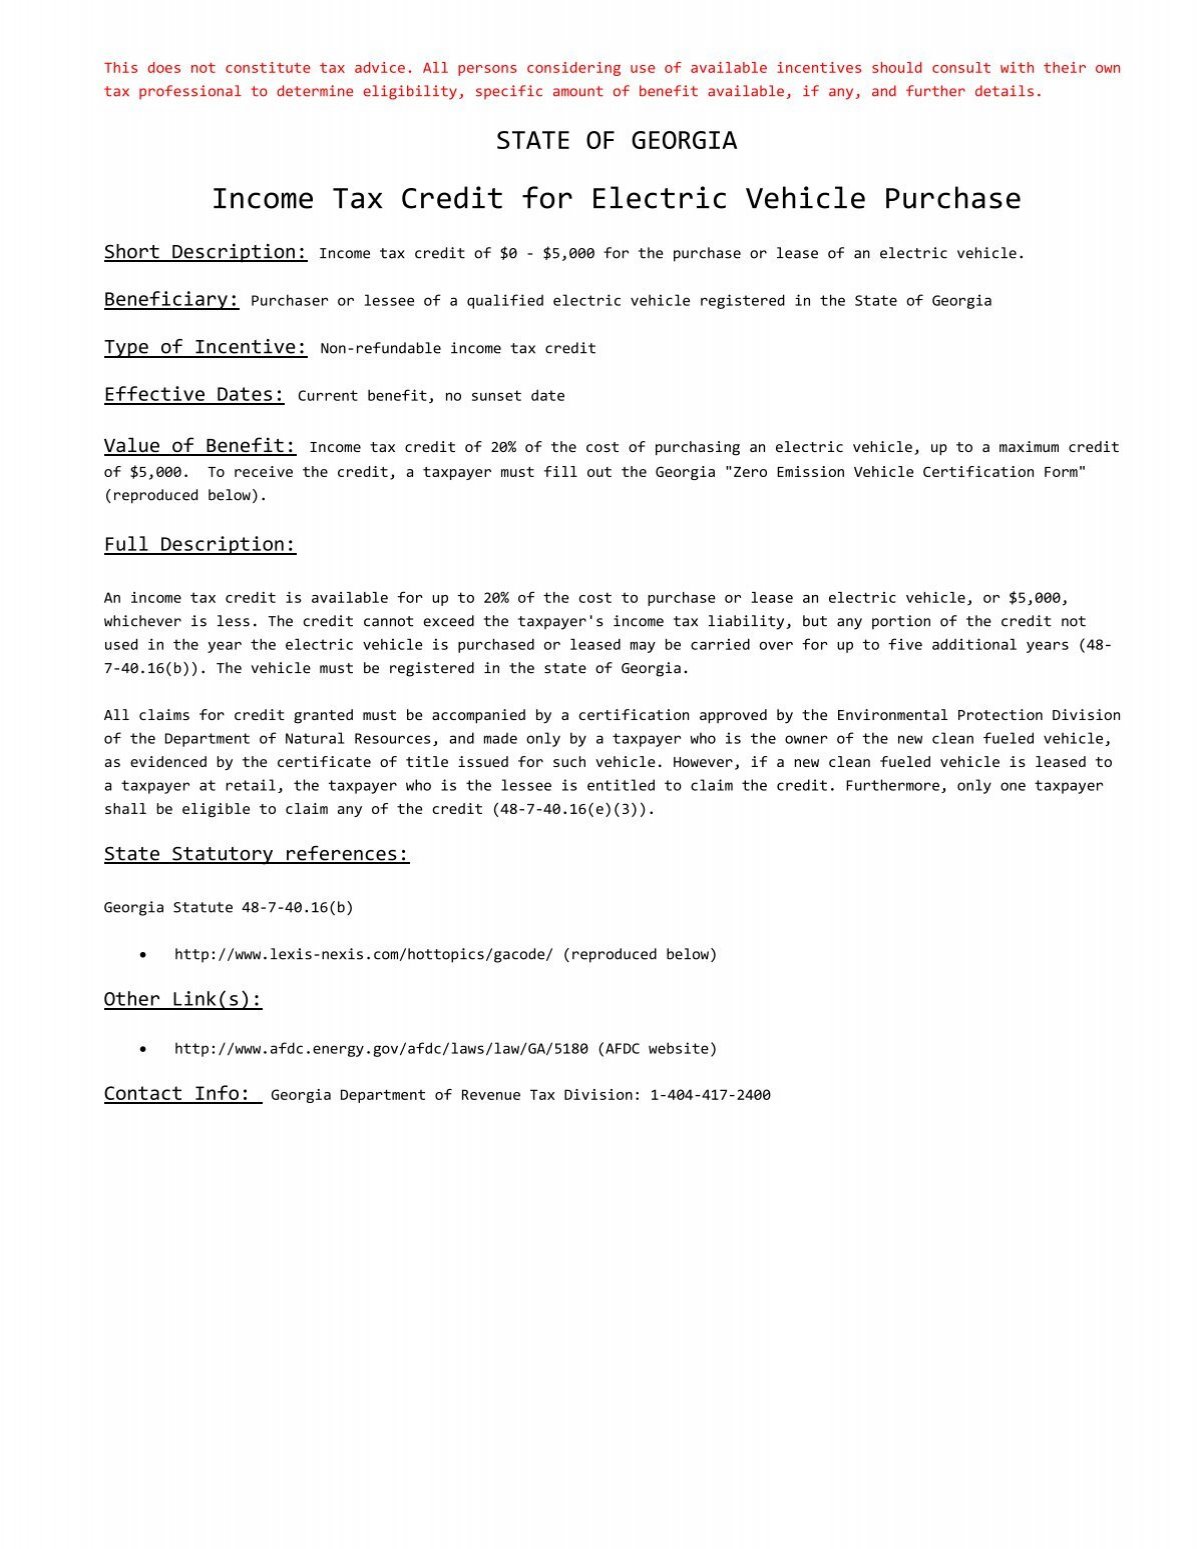 income-tax-credit-for-electric-vehicle-purchase-nissan-usa